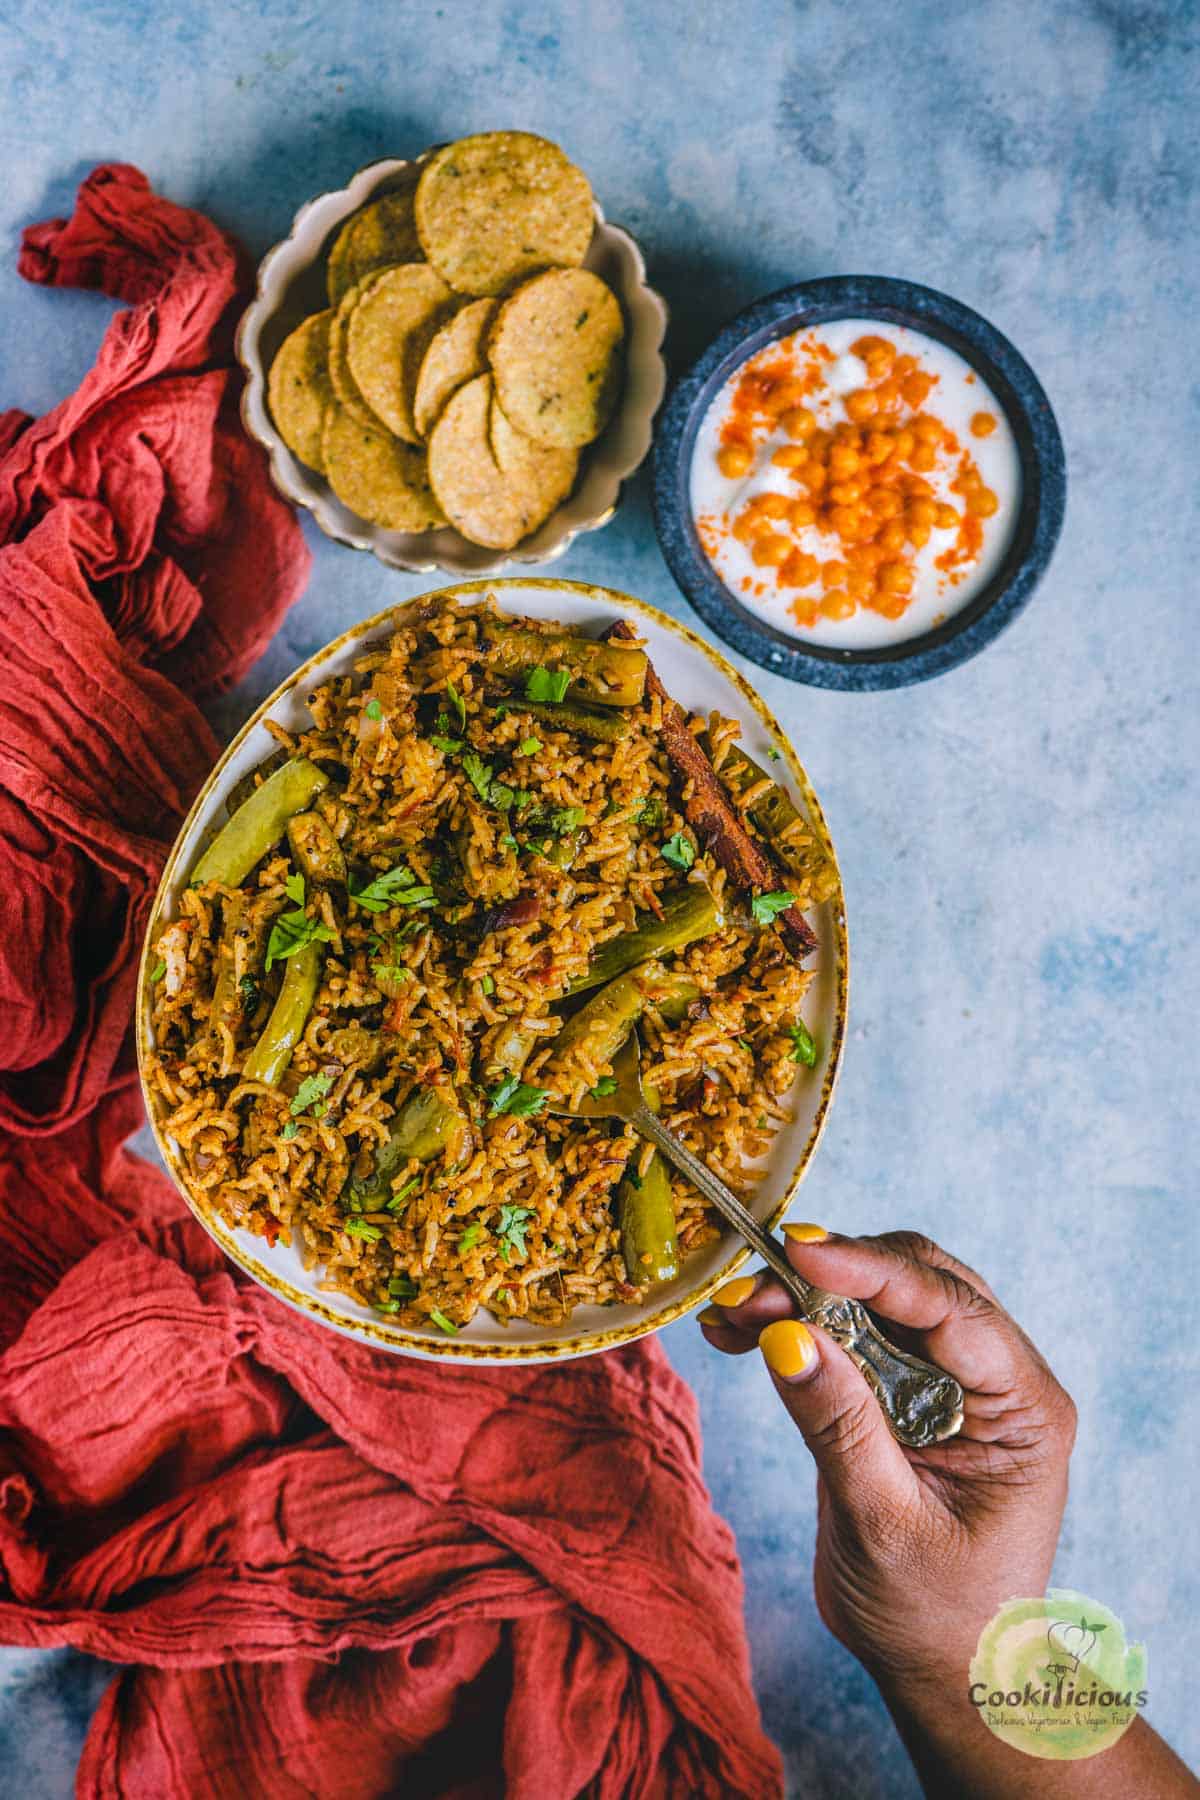 a hand digging into a plate of Tendli Masala Bhaat holding a spoon